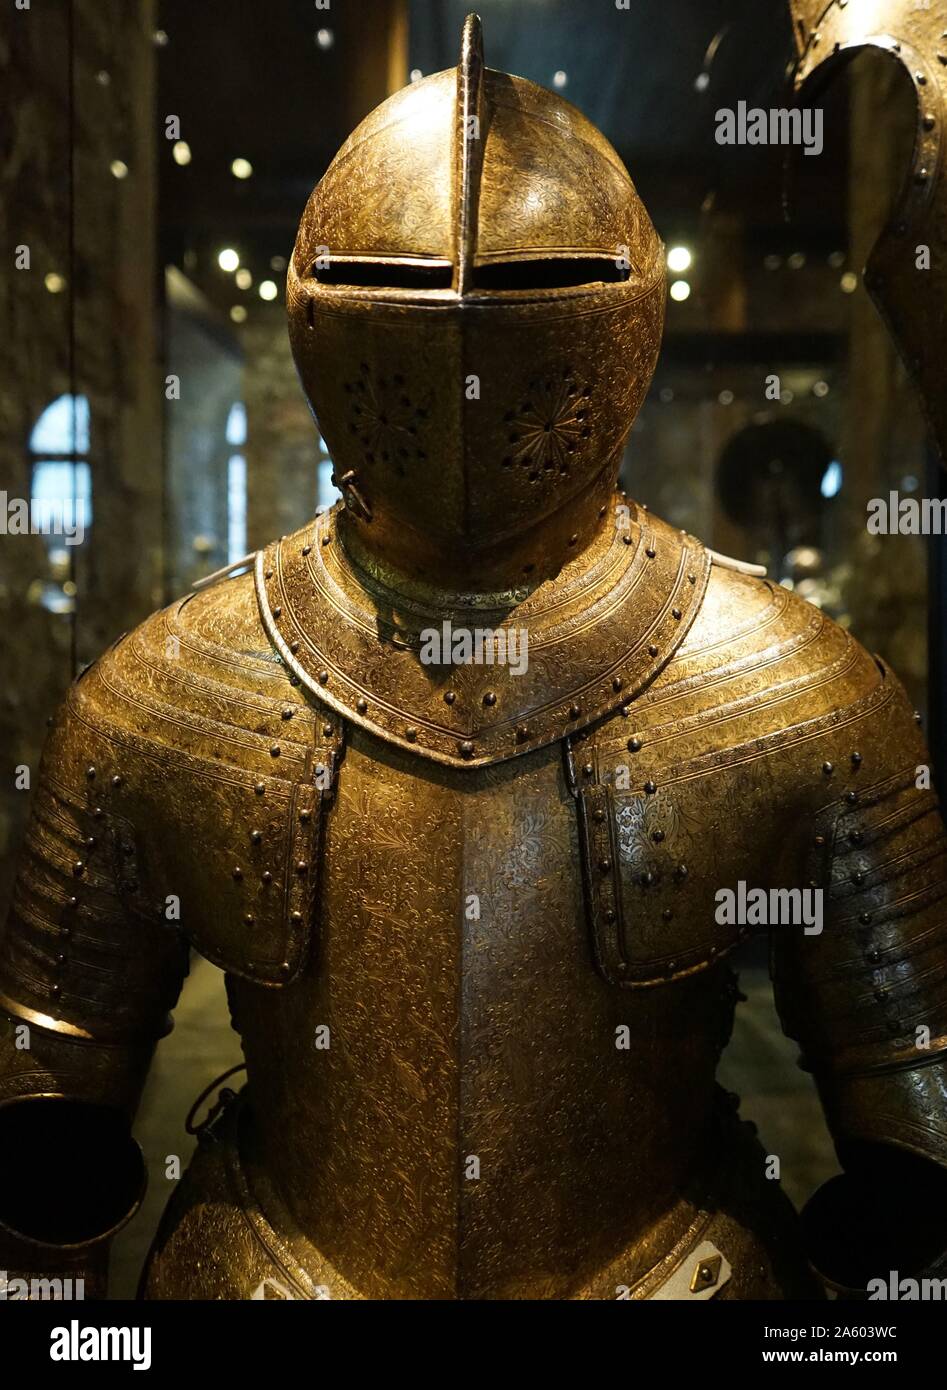 Armour of King Charles I of England (1600-1649) monarch of the three kingdoms of England, Scotland, and Ireland. Dated 17th Century Stock Photo